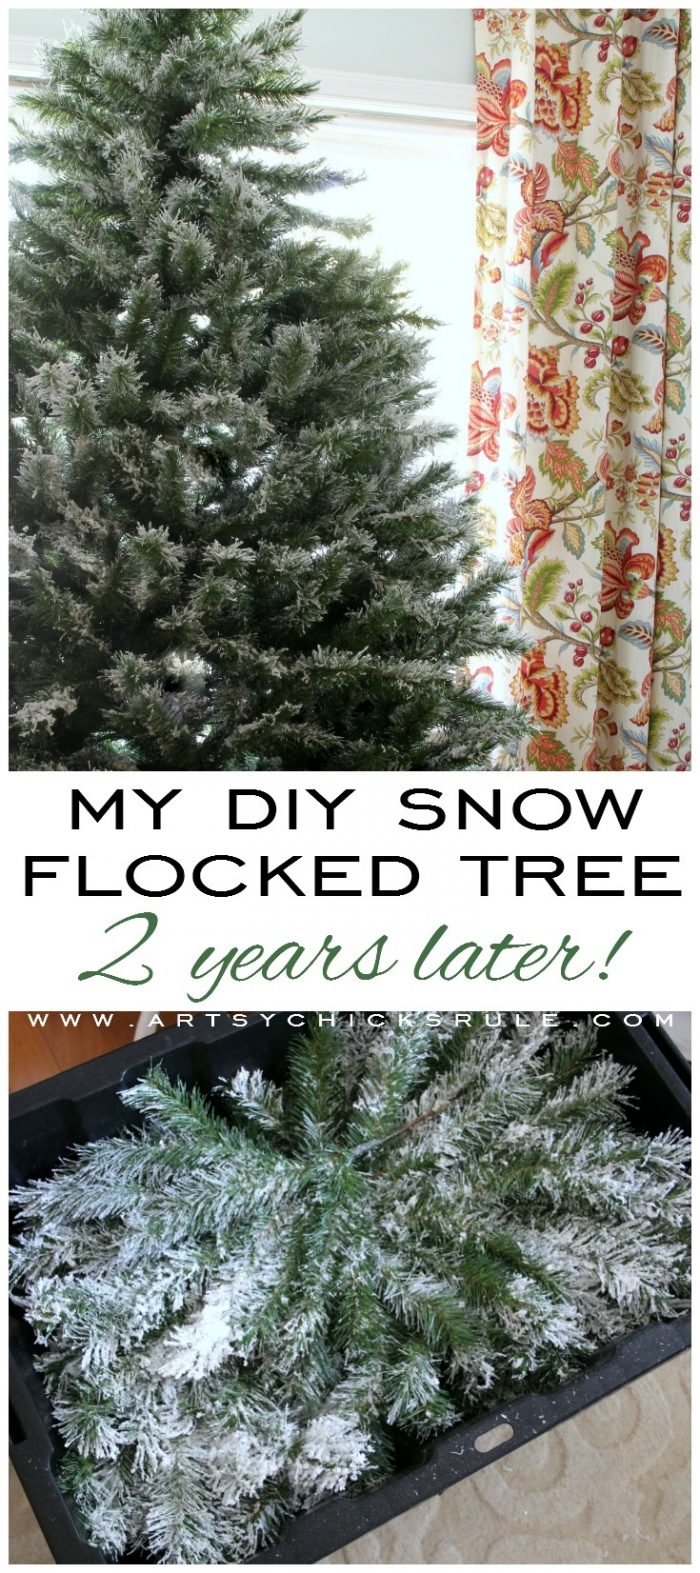 My DIY Snow Flocked Tree -2 Years Later (all the details!)